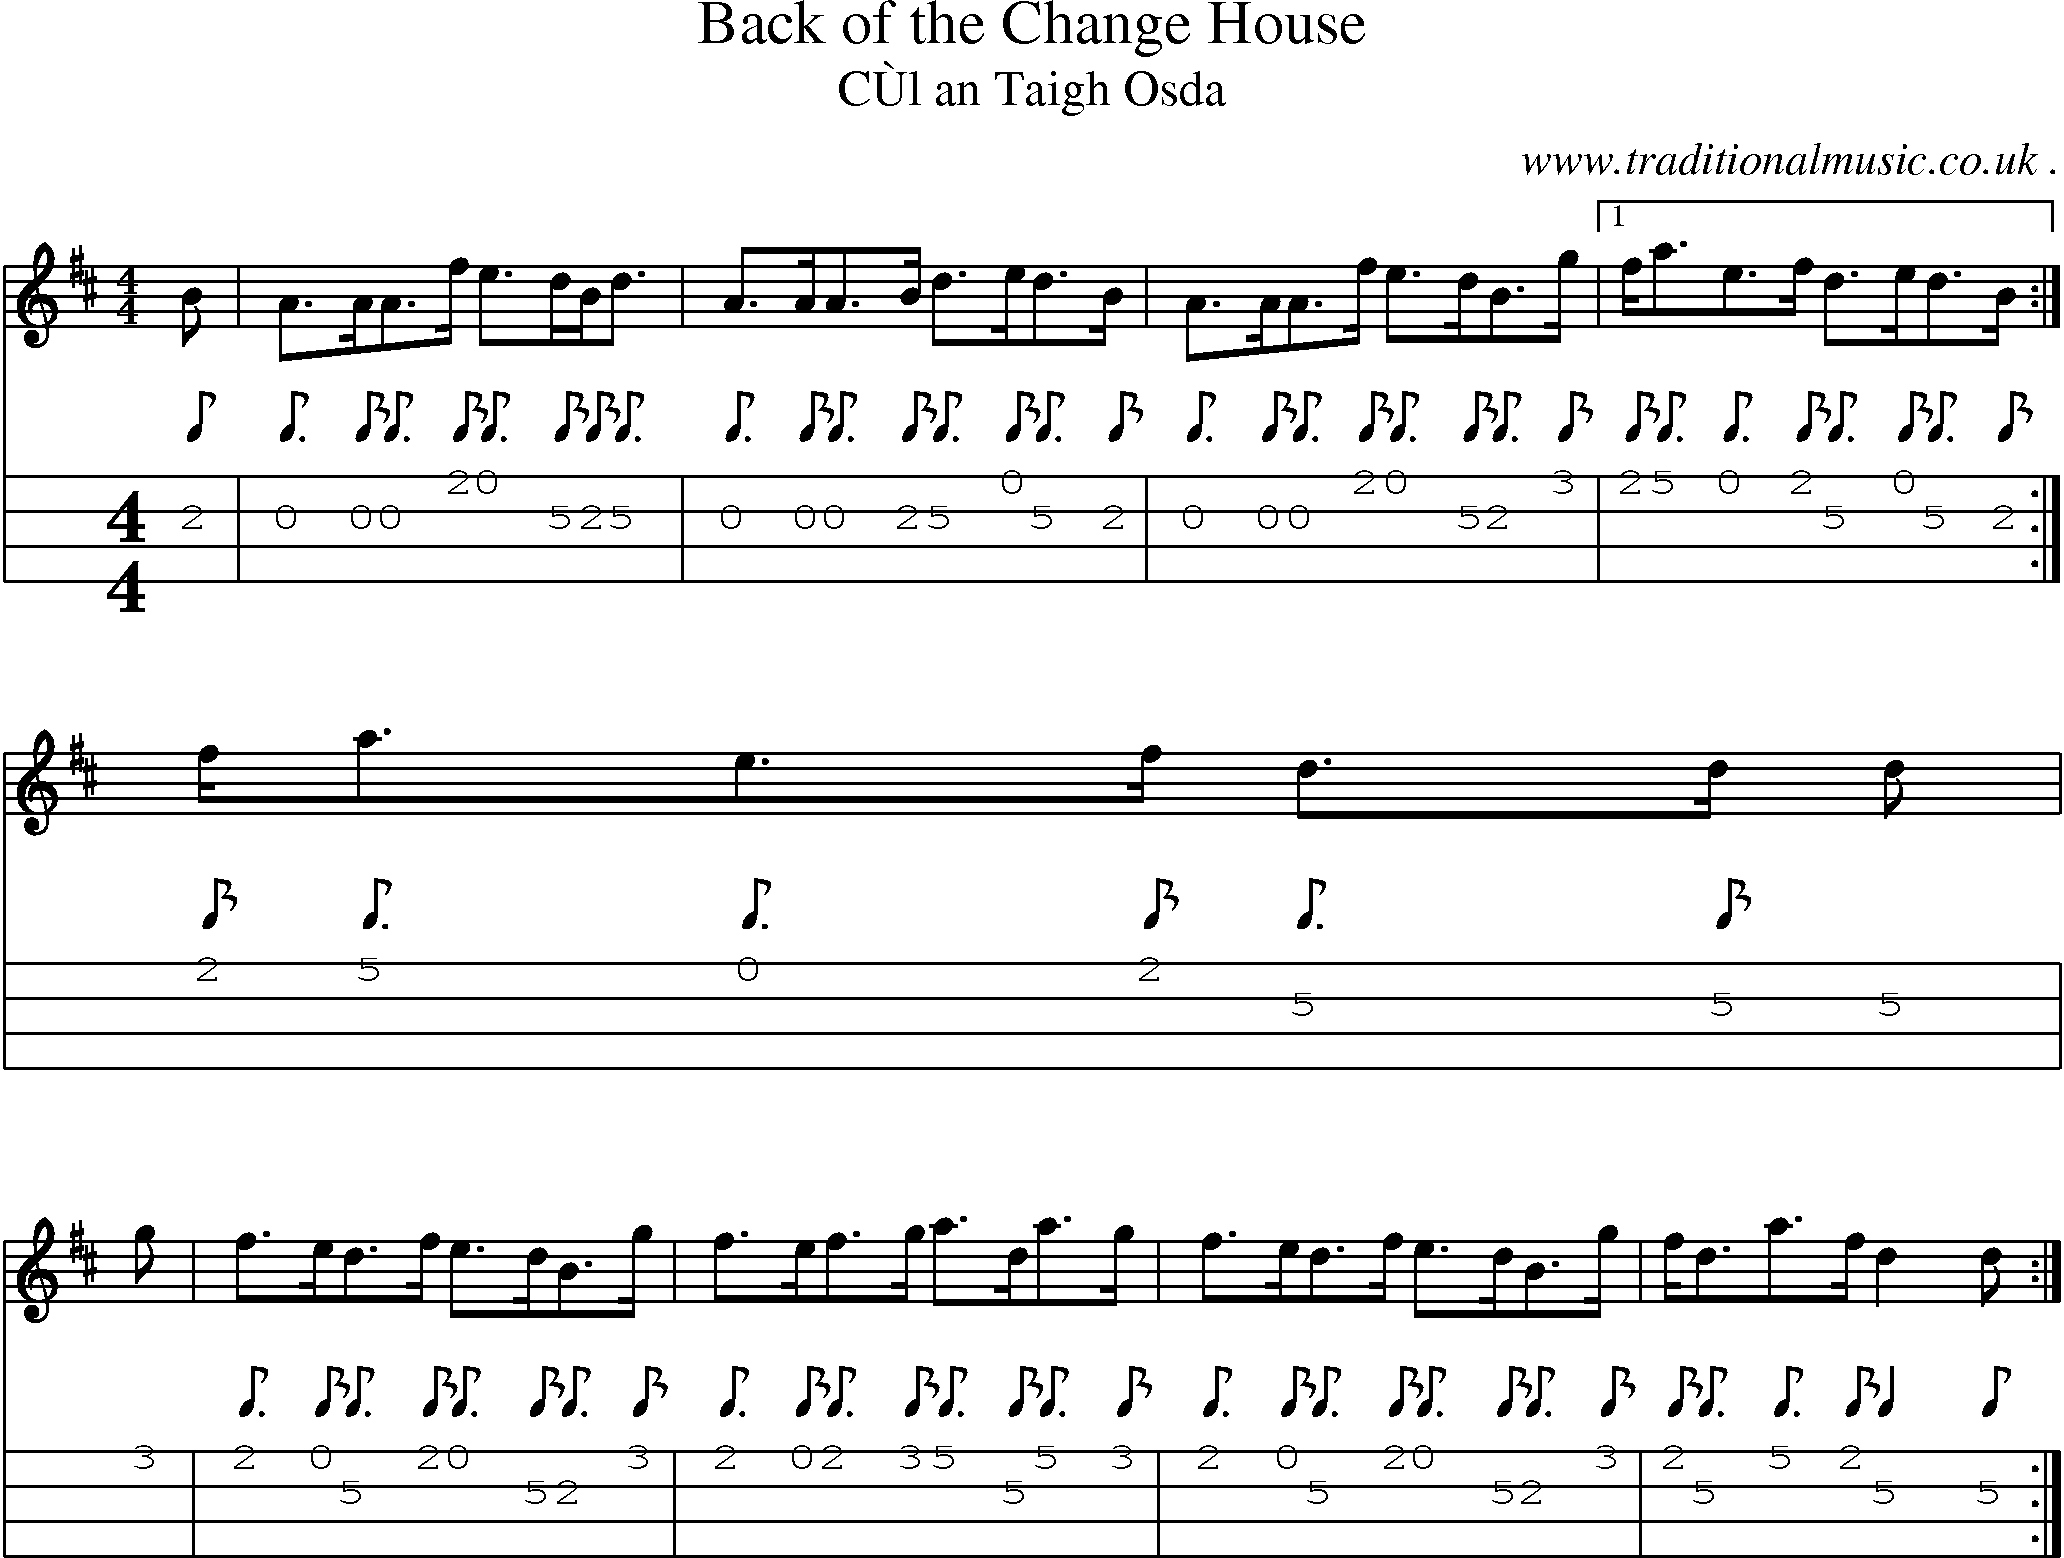 Sheet-music  score, Chords and Mandolin Tabs for Back Of The Change House